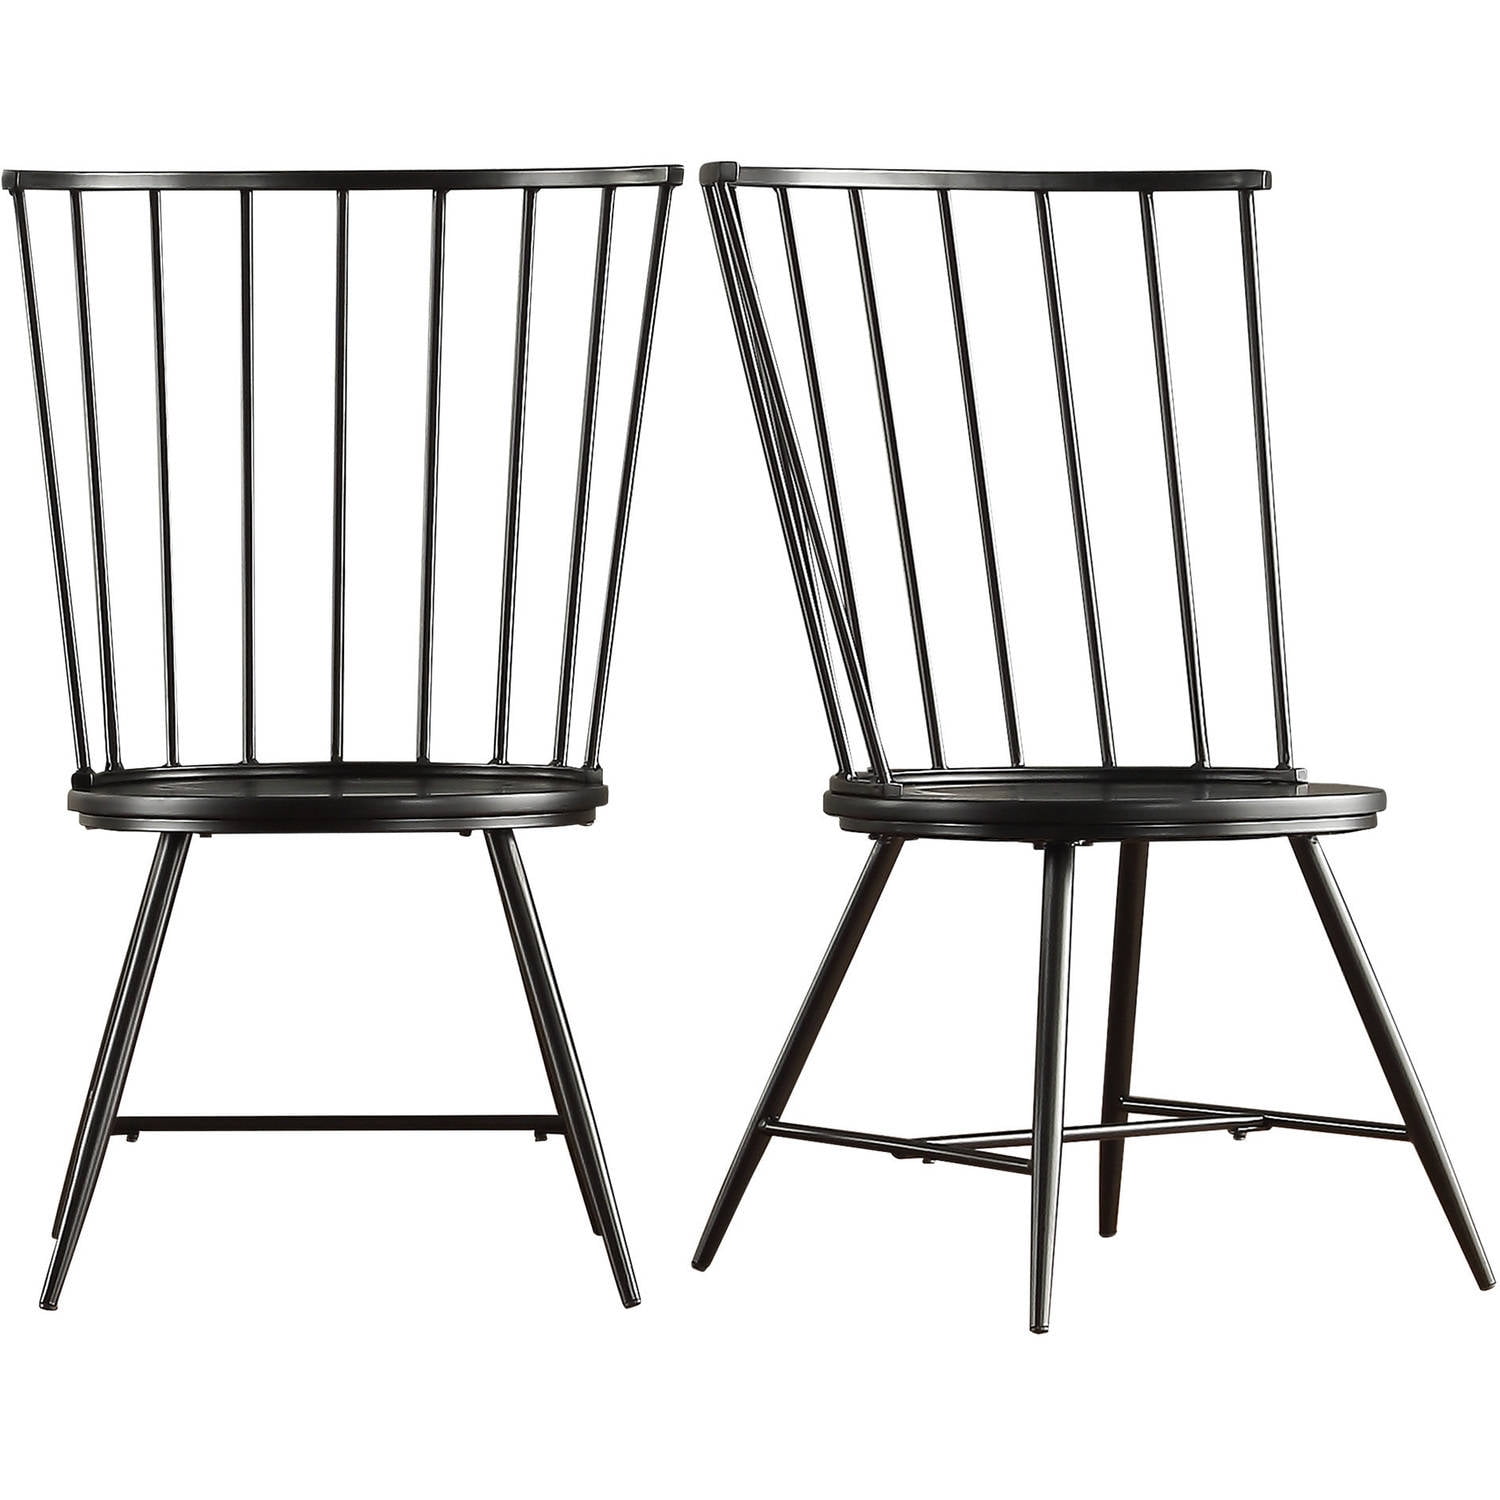 Weston Home Chelsea Dining Chair Set, Black Metal Dining Chairs Set Of 2